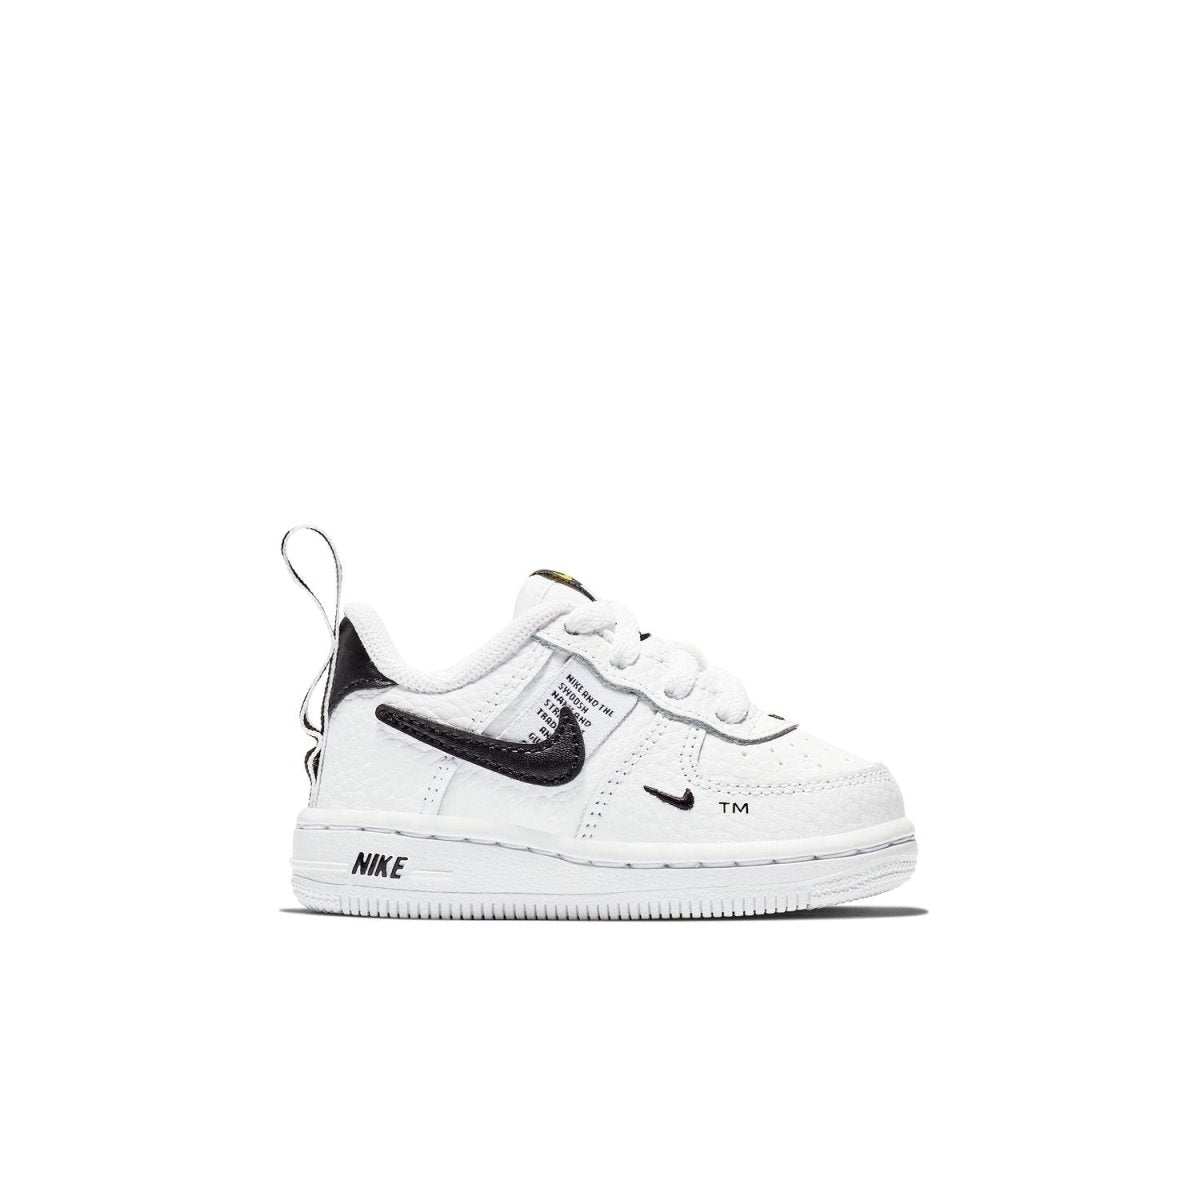 nike air force 1 lv8 utility black and white